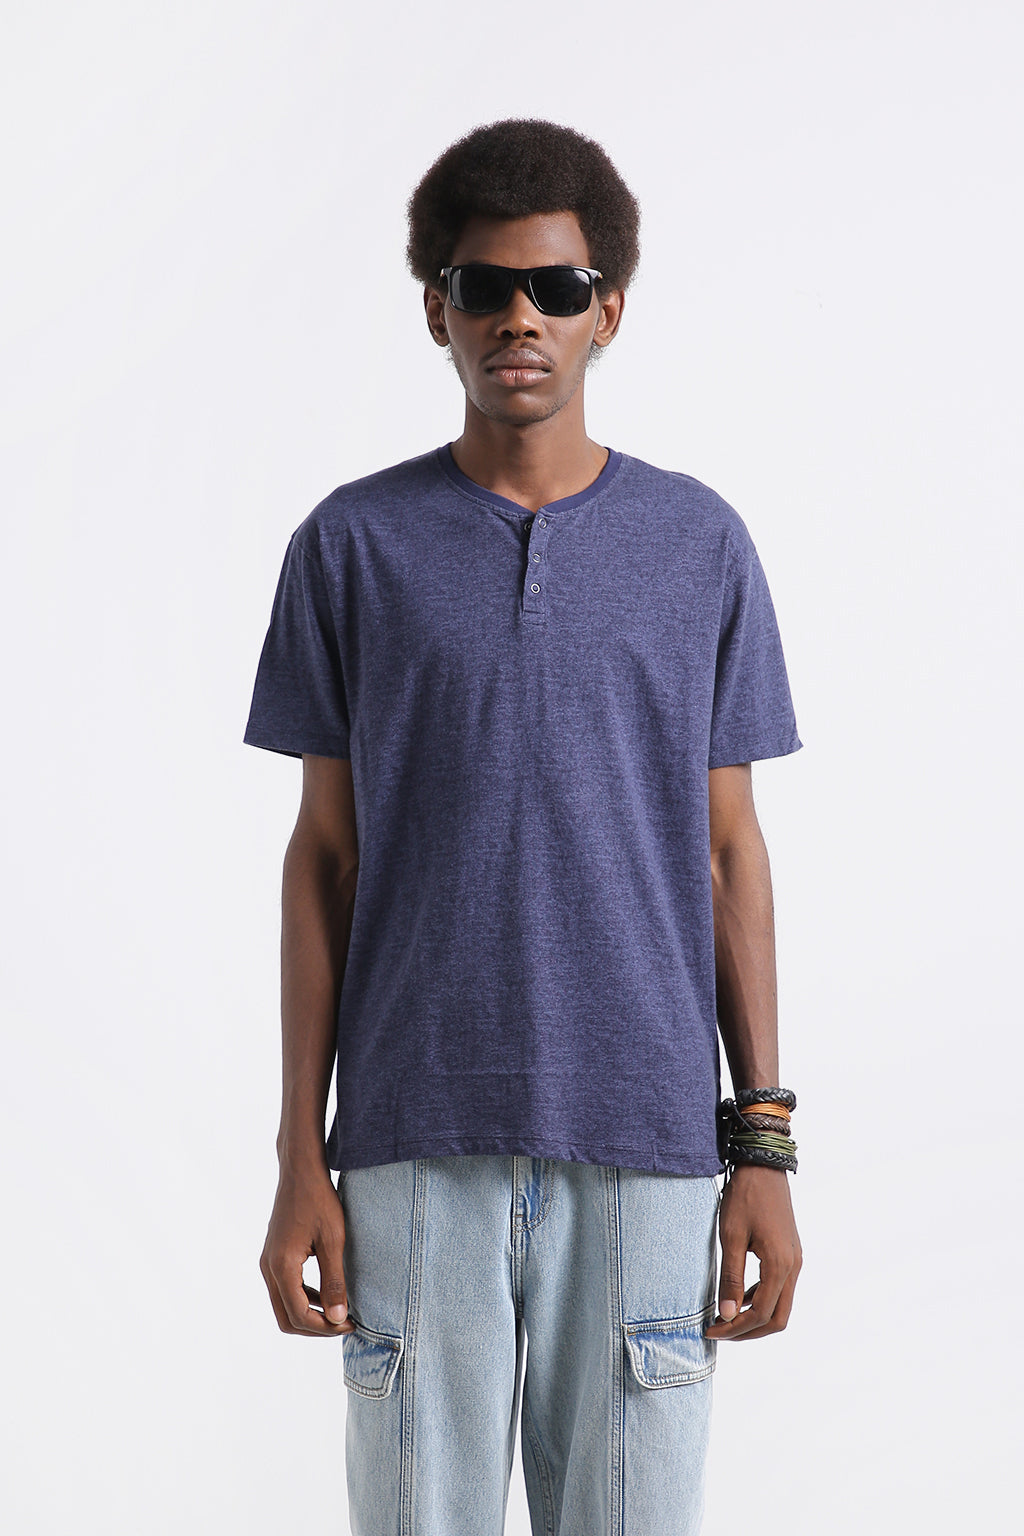 HENLEY NECK SOLID T-SHIRT